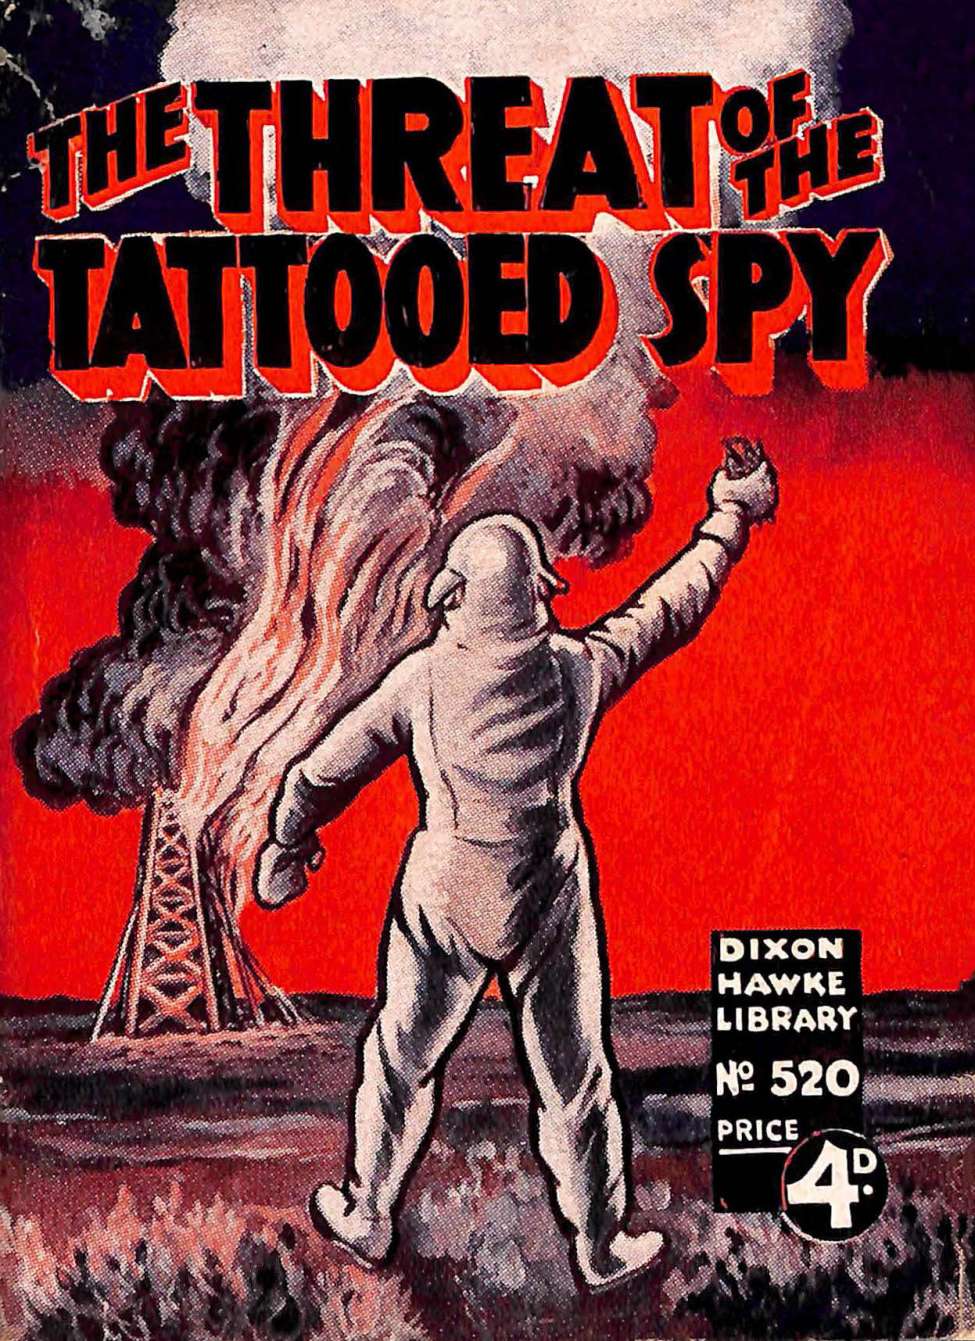 Book Cover For Dixon Hawke Library 520 - The Threat of the Tattooed Spy